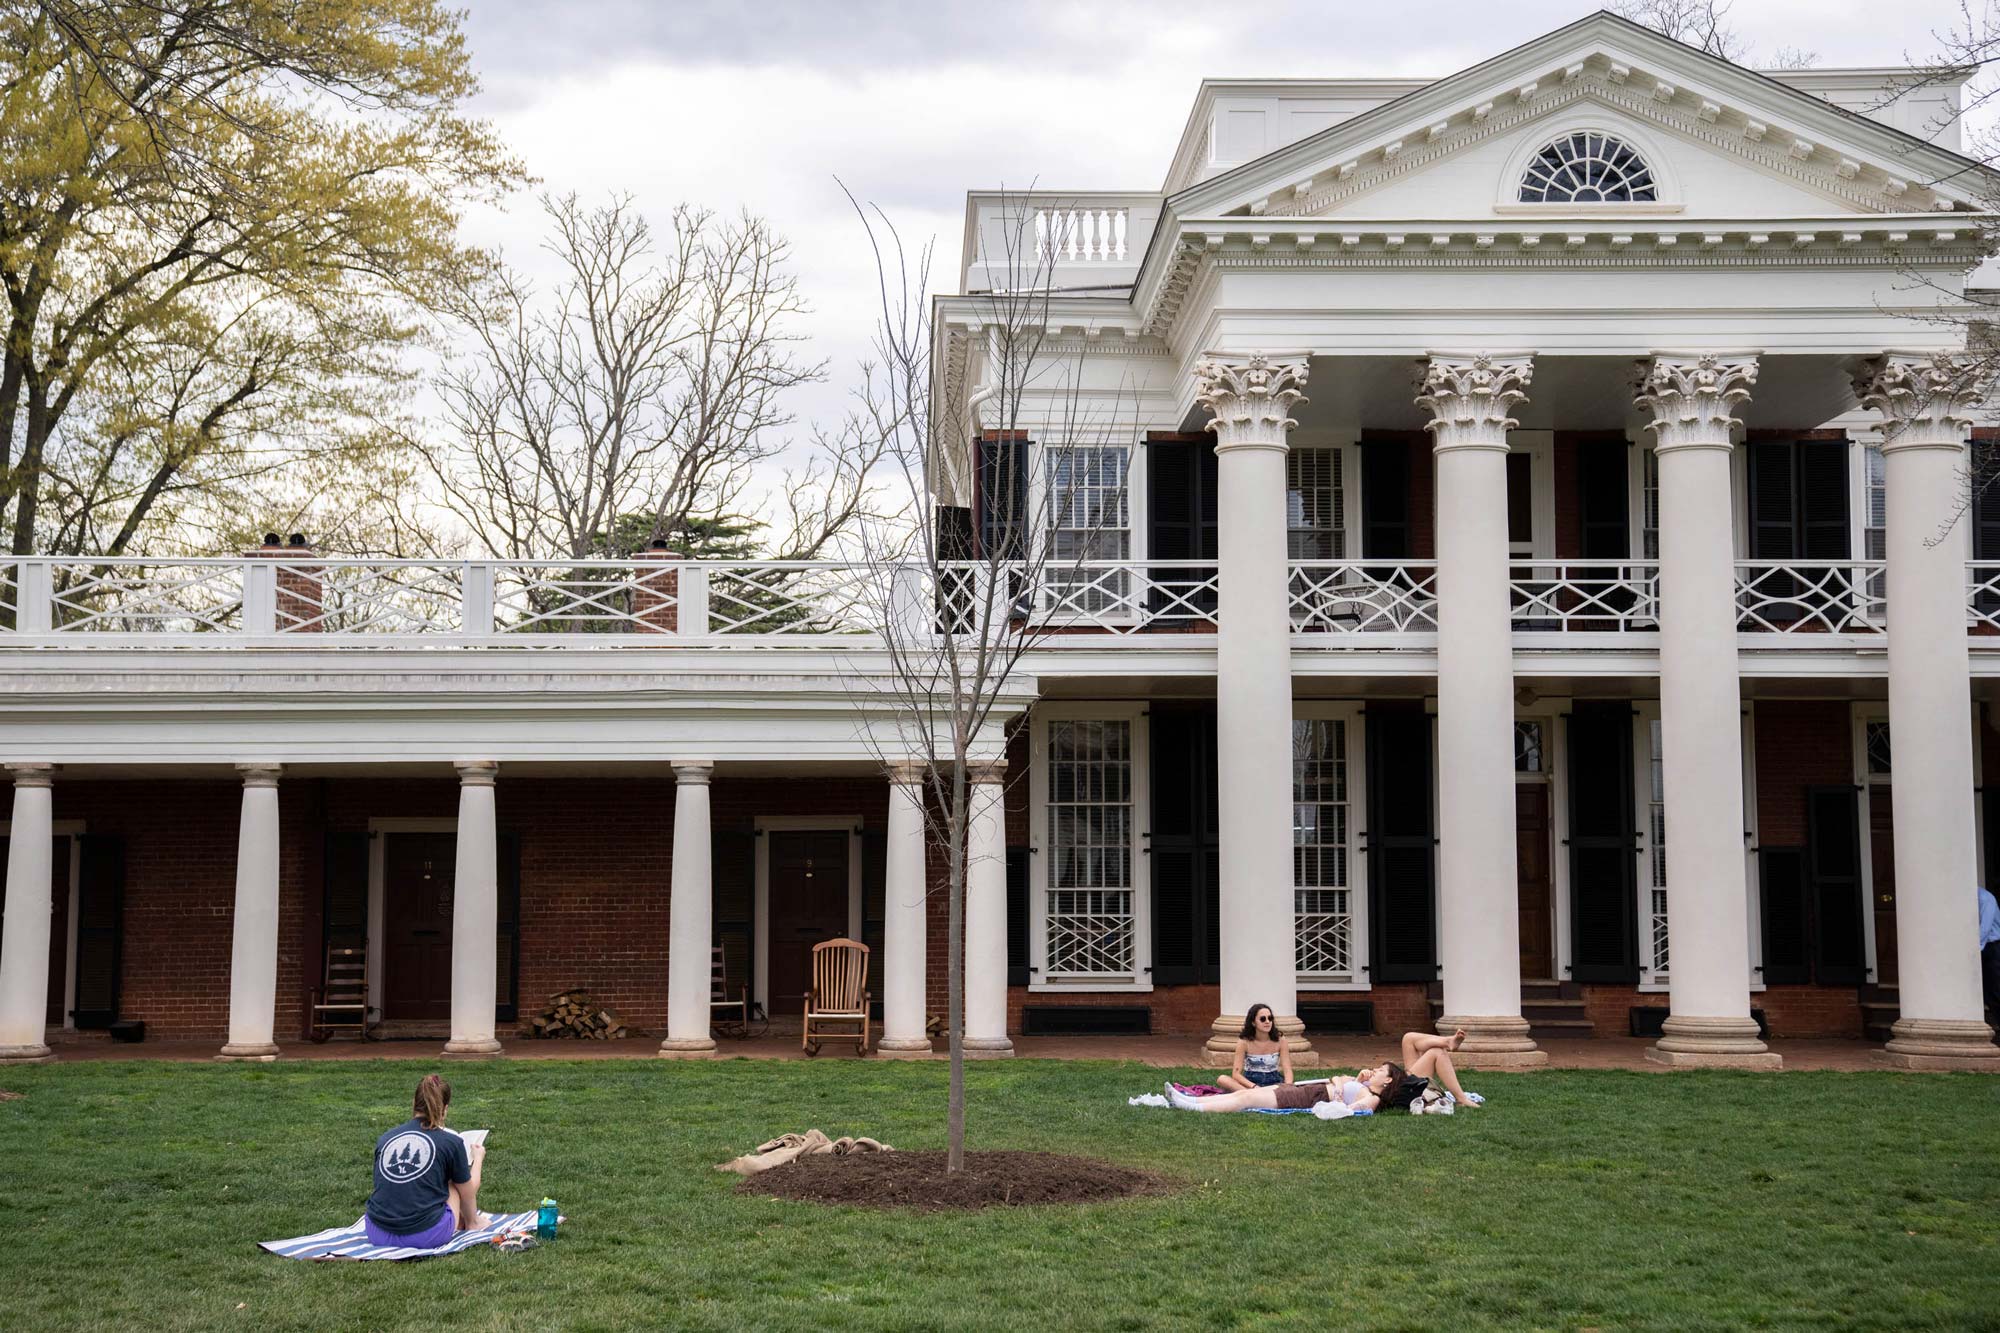 UVA students relax in the grass near a leafless, newly planted tree